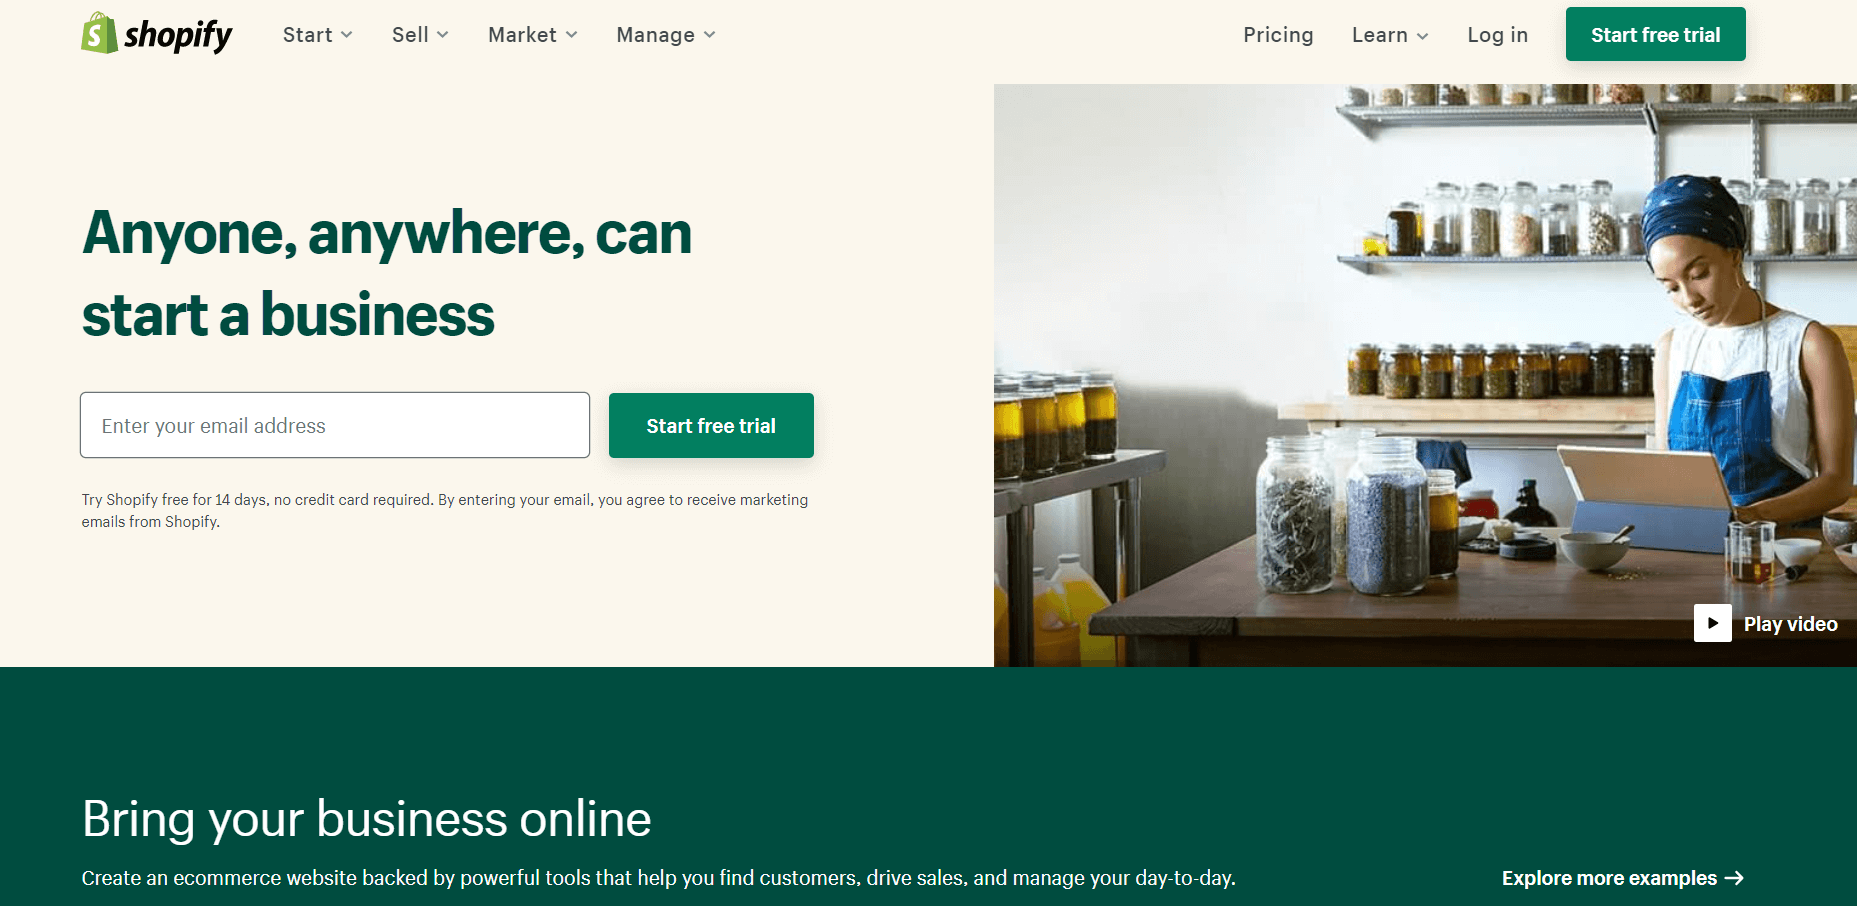 Shopify's homepage